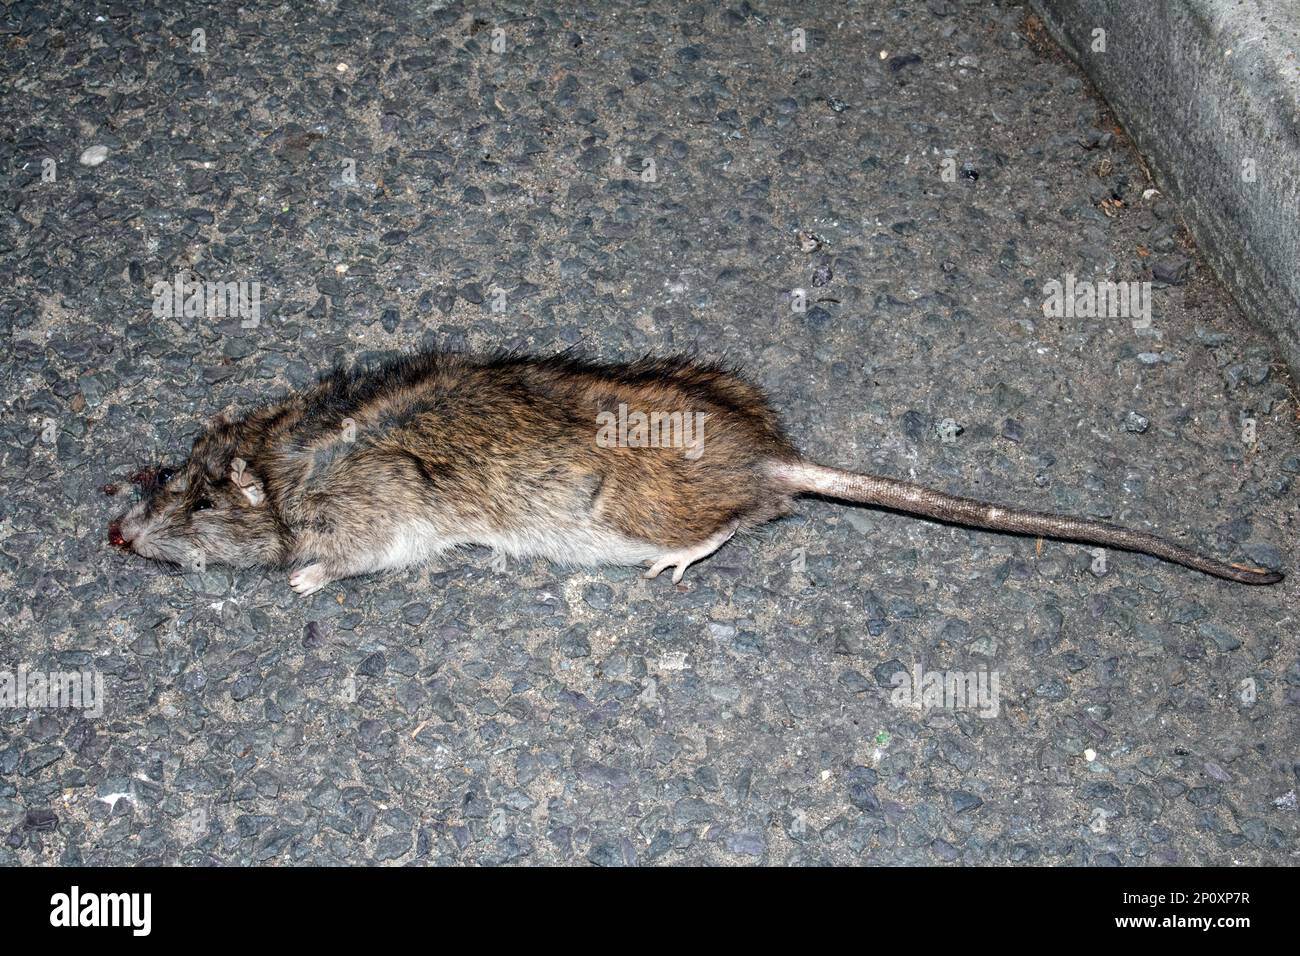 A Dead Crushed Rat that has been Run Over By A Car Wheel on a Pavement Road in an Urban Town Stock Photo